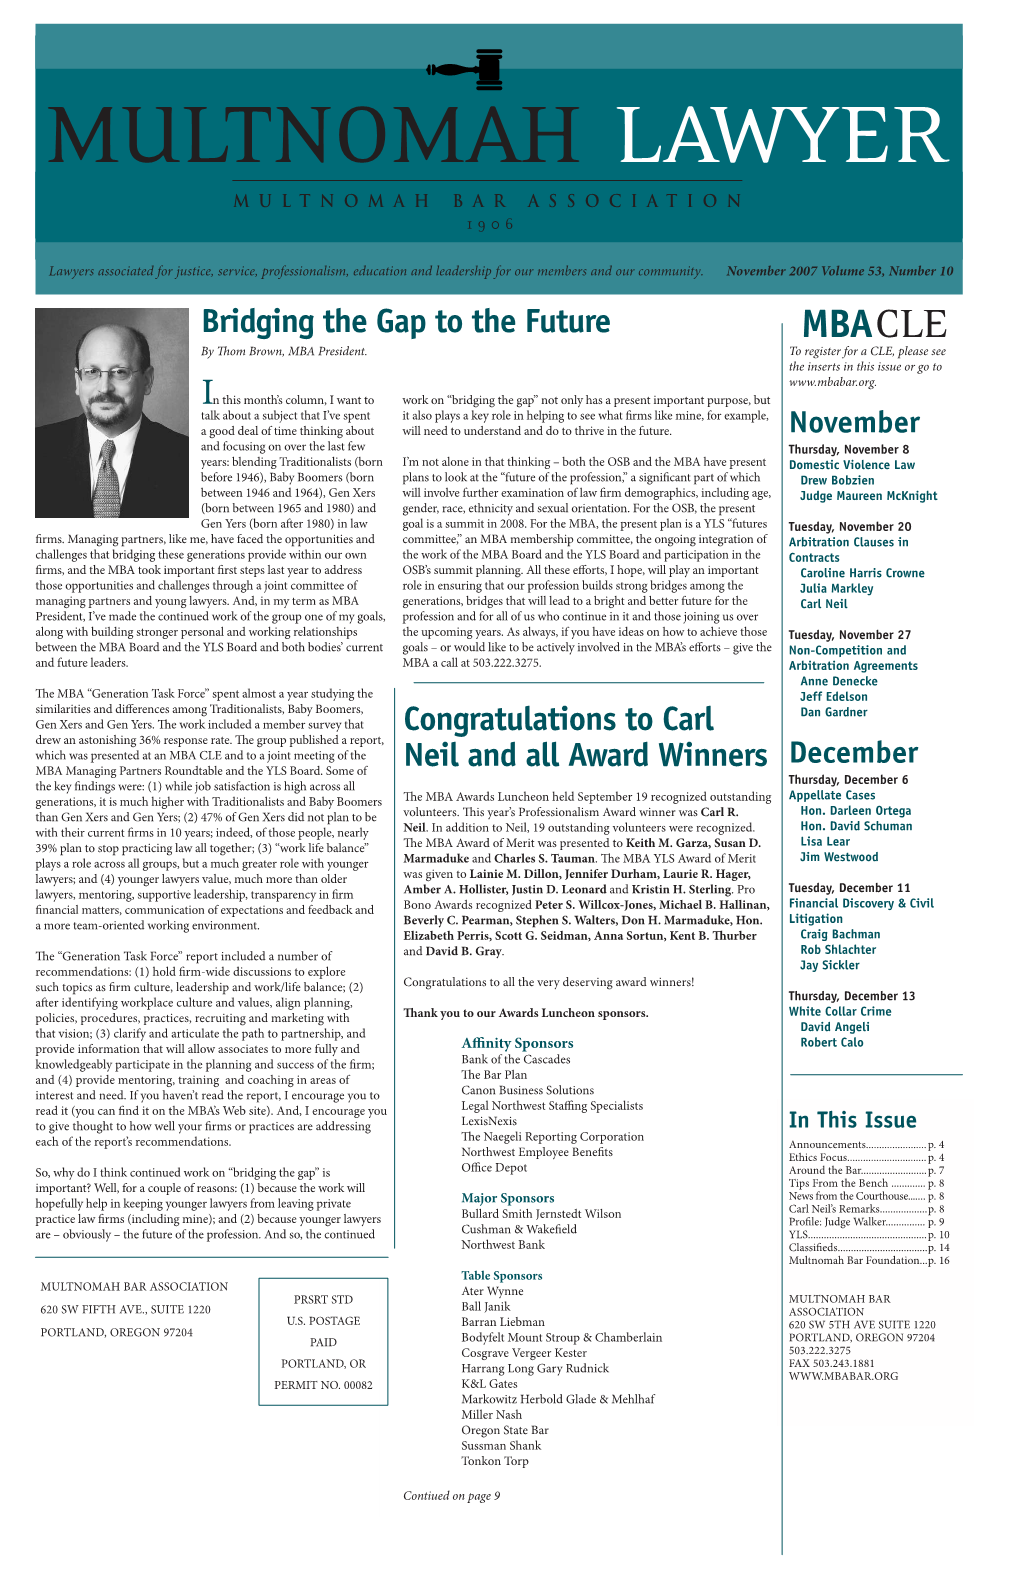 November 2007 Volume 53, Number 10 Bridging the Gap to the Future MBACLE by Th Om Brown, MBA President